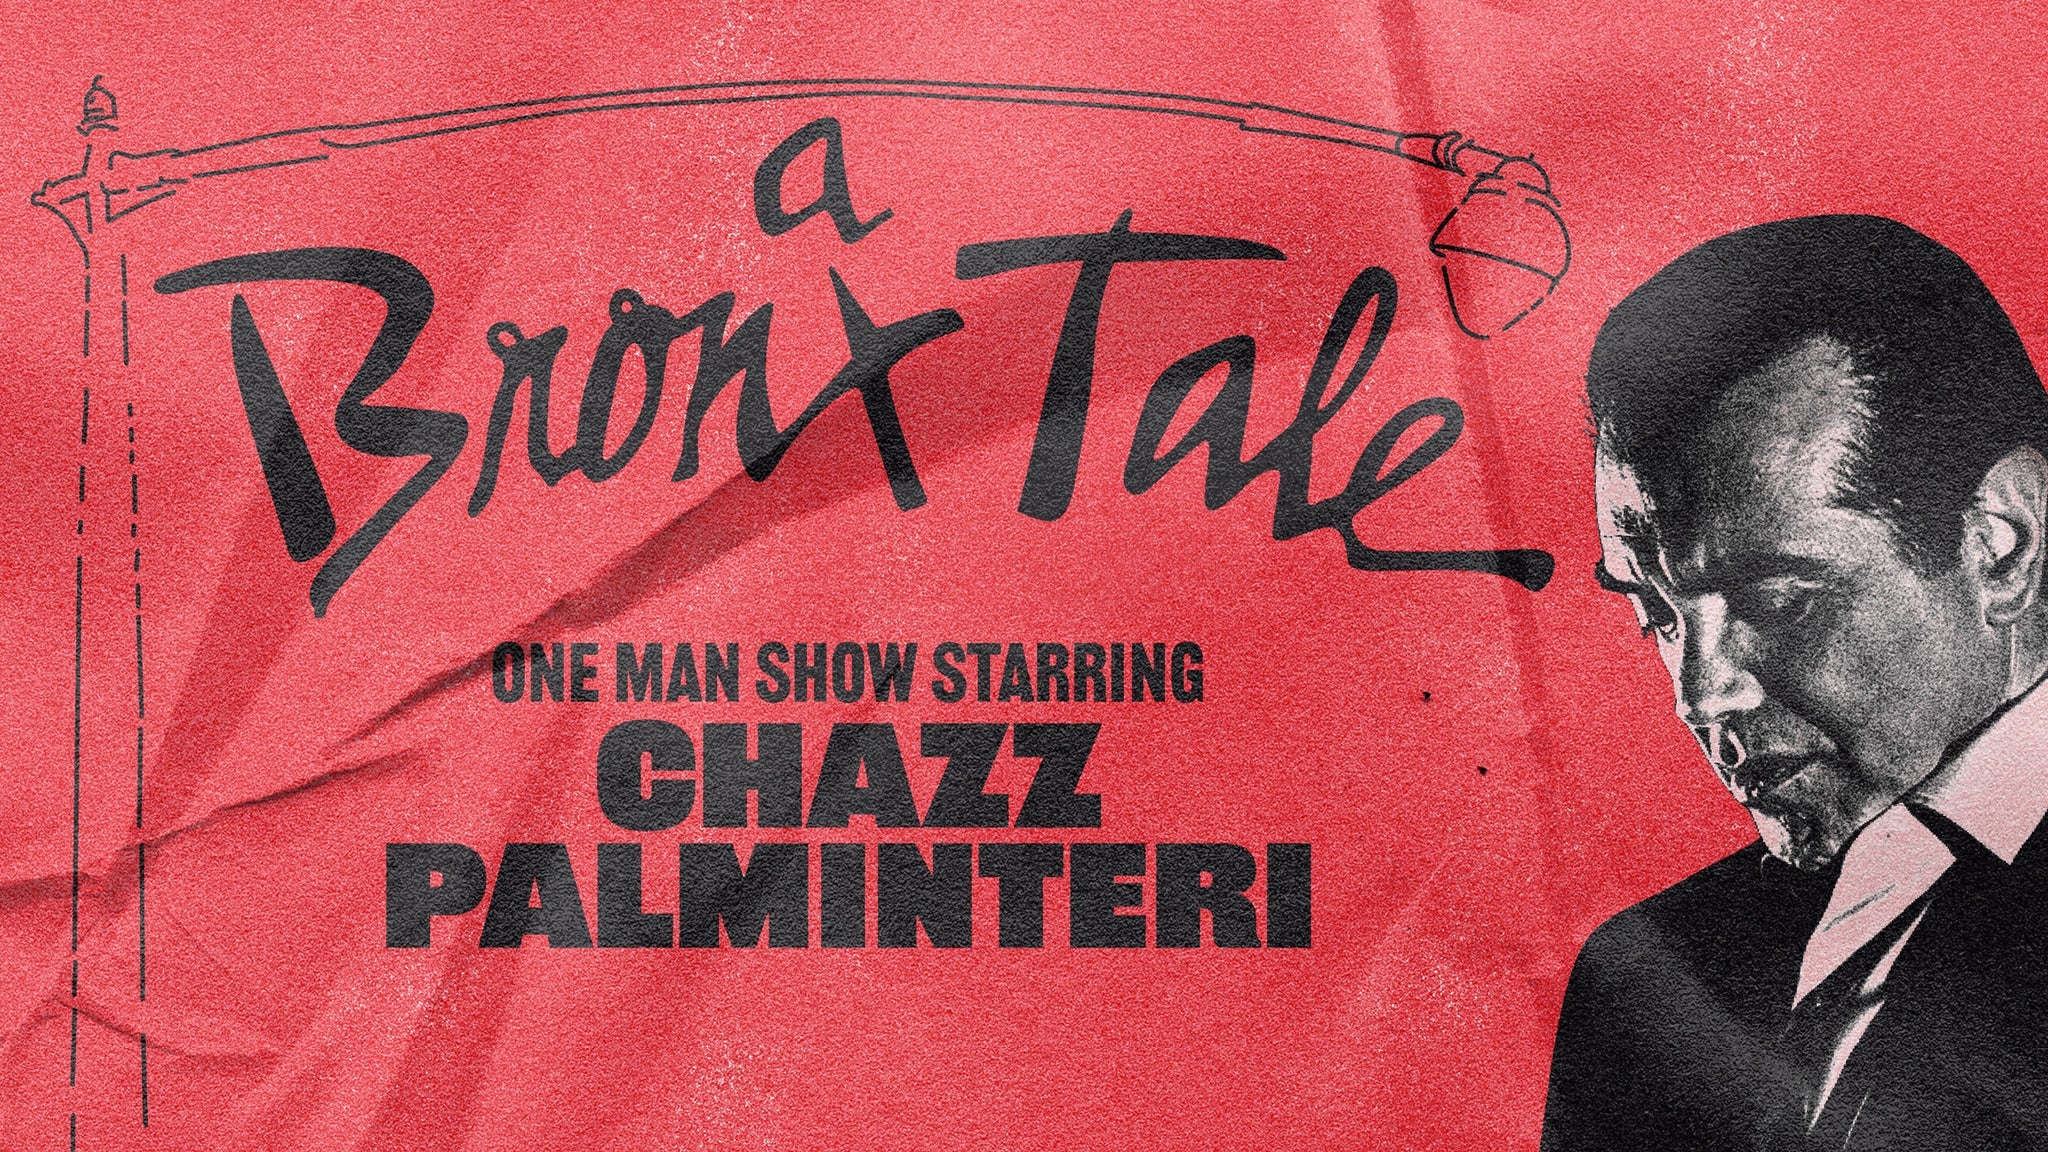 Chazz Palminteri- A Bronx Tale in Montclair promo photo for Live Nation presale offer code